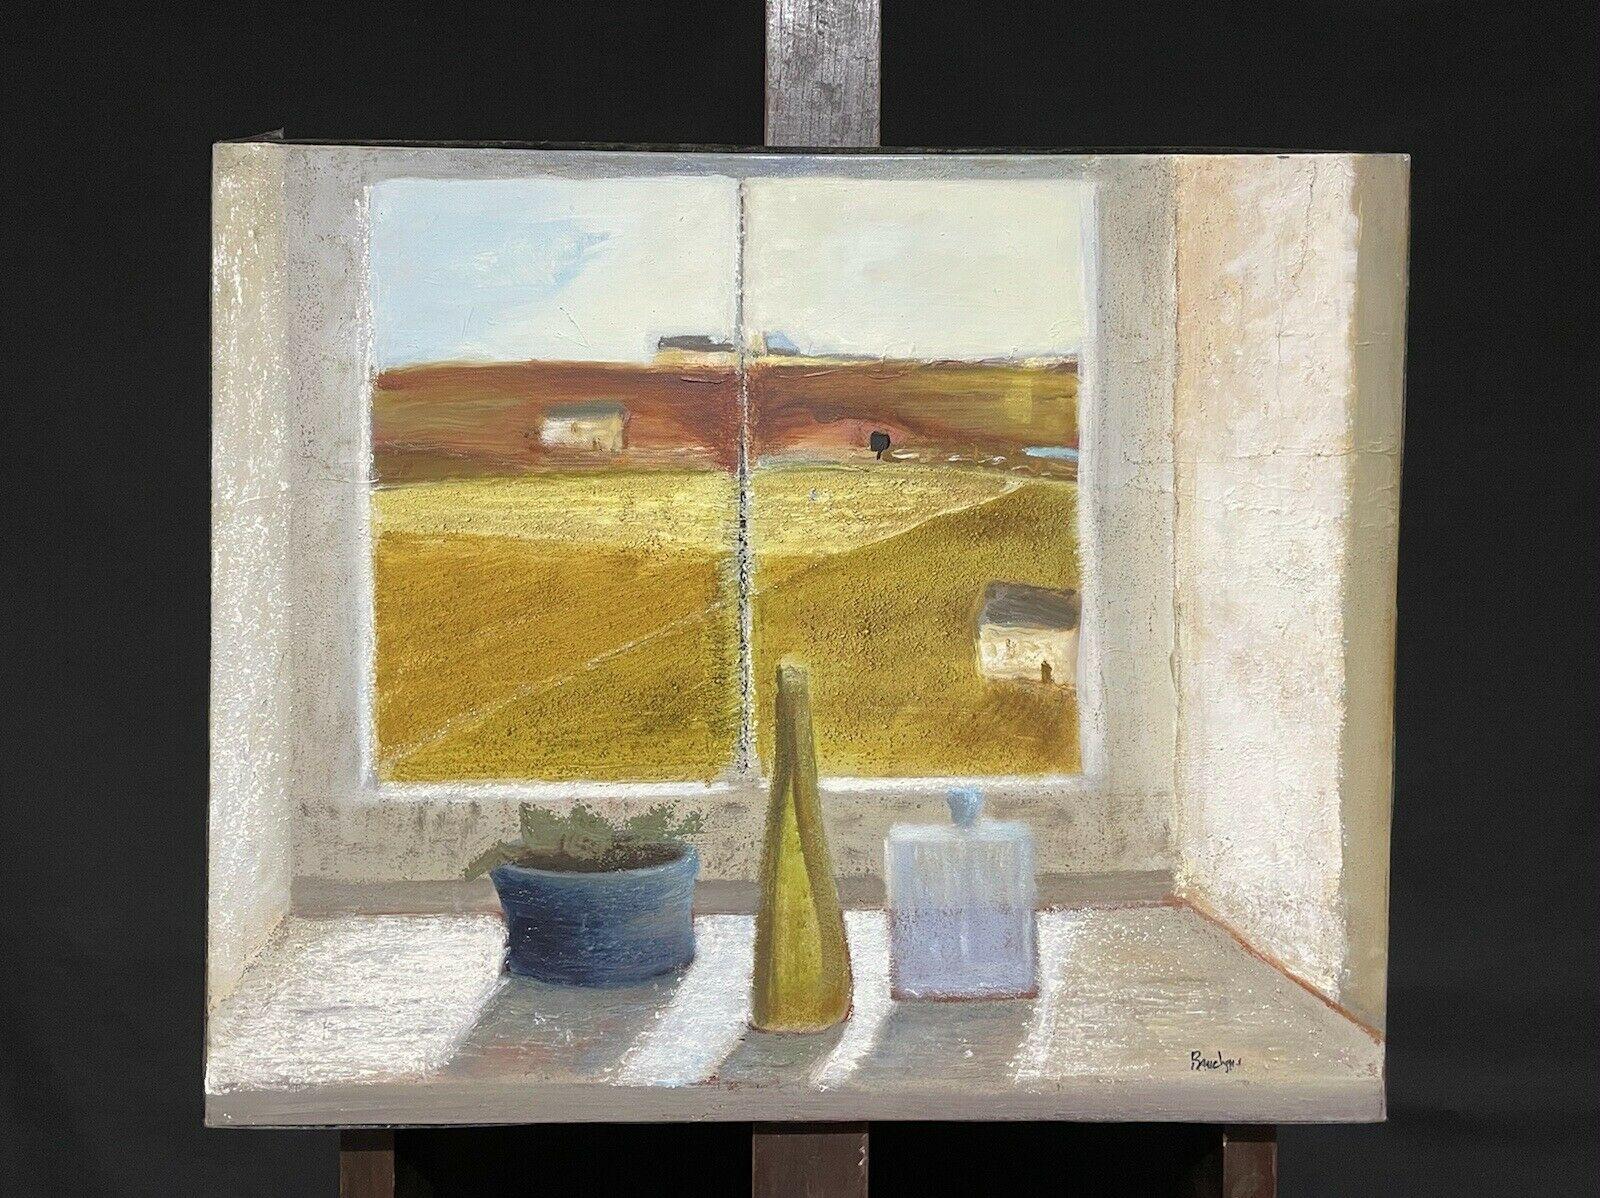 LARGE 20TH CENTURY FRENCH MODERNIST SIGNED OIL - INTERIOR ROOM WINDOW SILL VIEW - Painting by Unknown